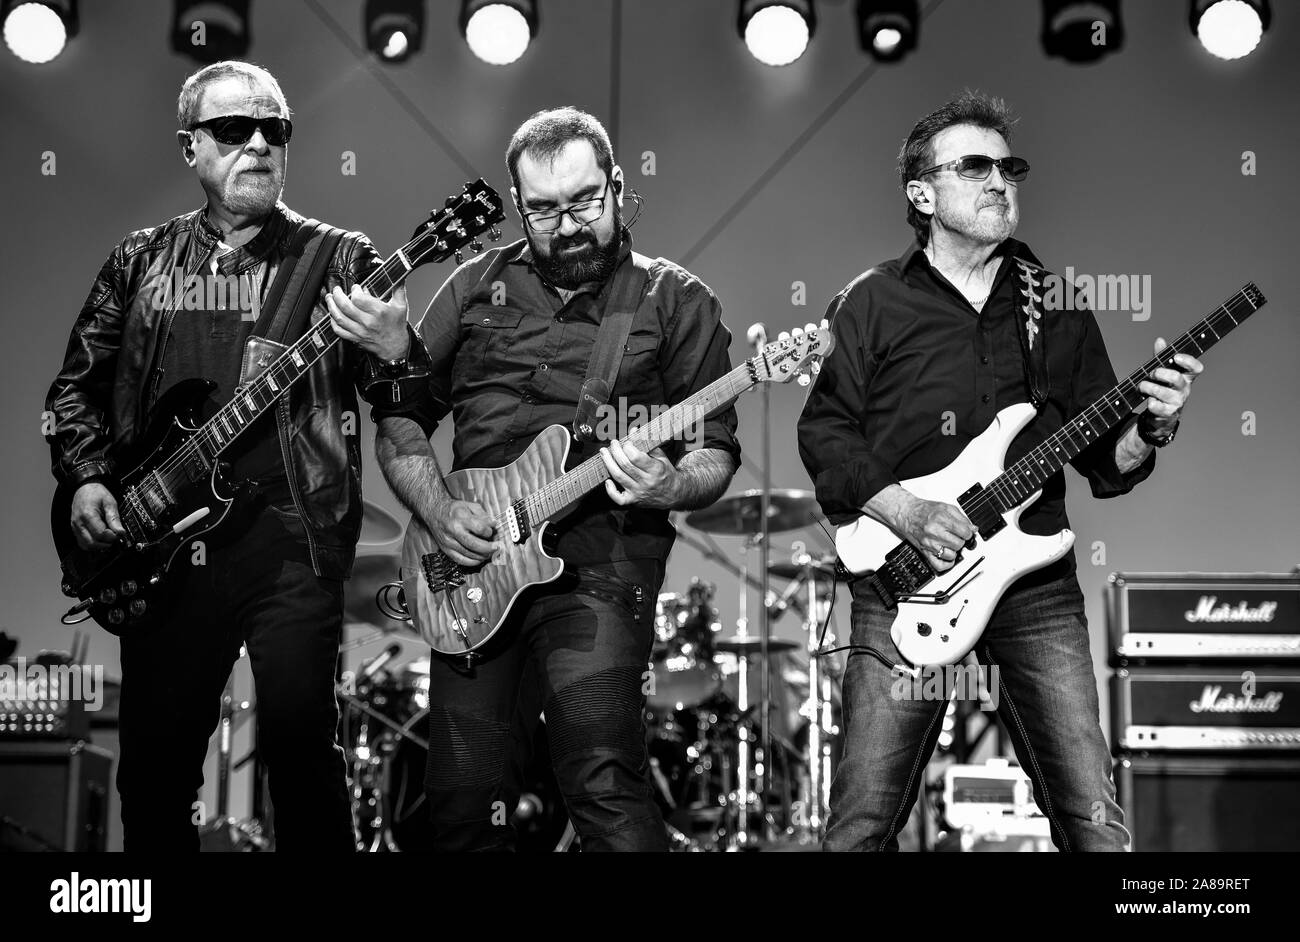 July 4, 2019, Moapa Nevada, Blue Oyster Cult on stage at the Moapa Event Center In Moapa, Nevada. Stock Photo